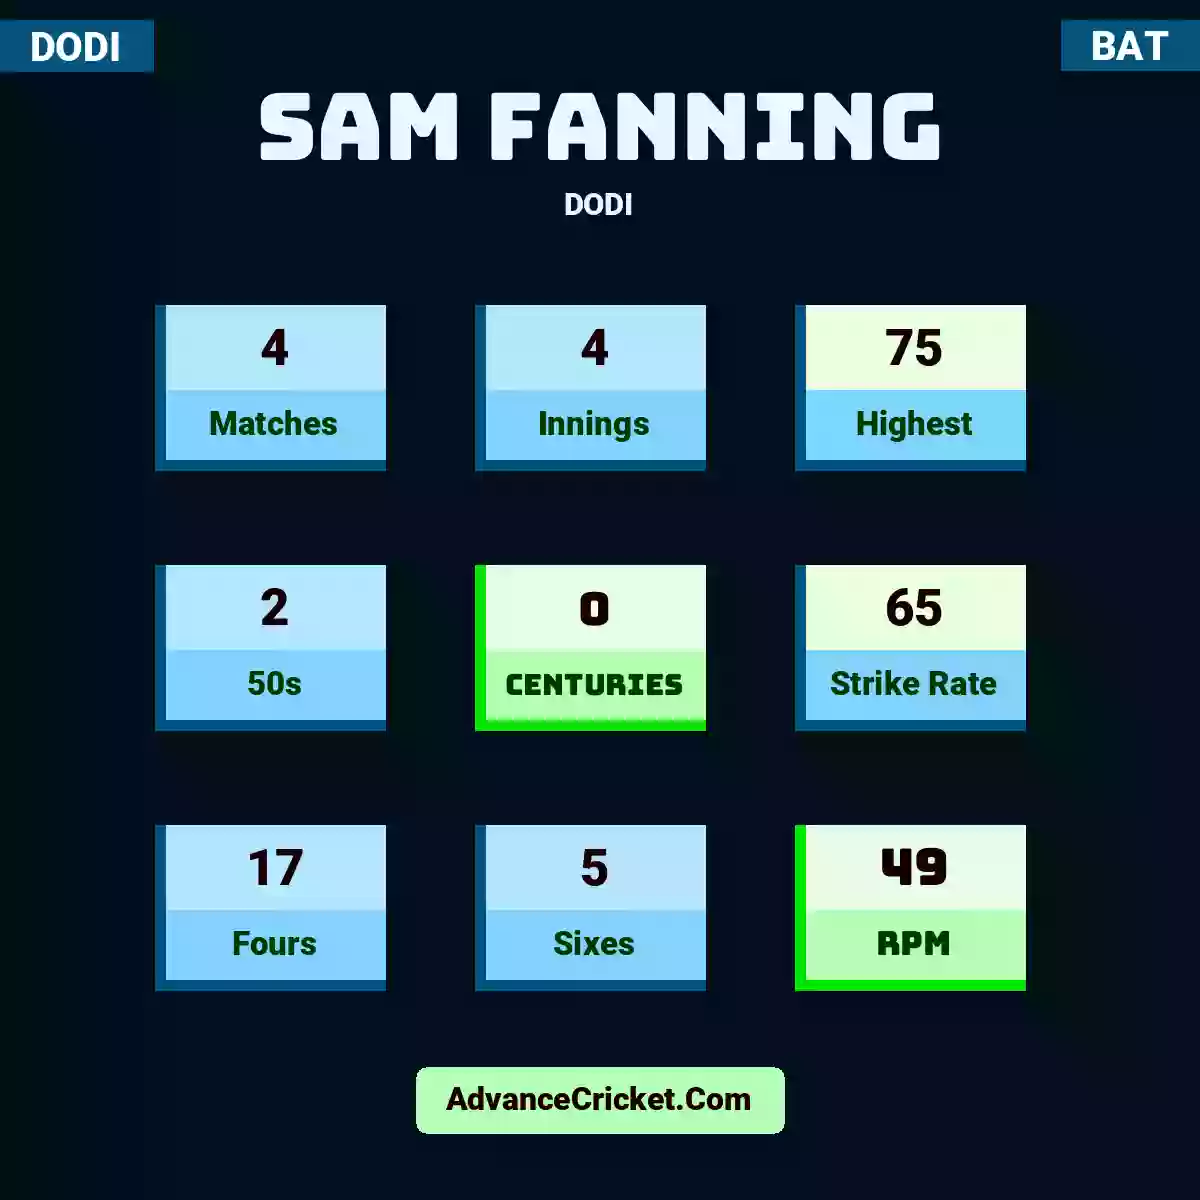 Sam Fanning DODI , Sam Fanning played 4 matches, scored 75 runs as highest, 2 half-centuries, and 0 centuries, with a strike rate of 65. S.Fanning hit 17 fours and 5 sixes, with an RPM of 49.